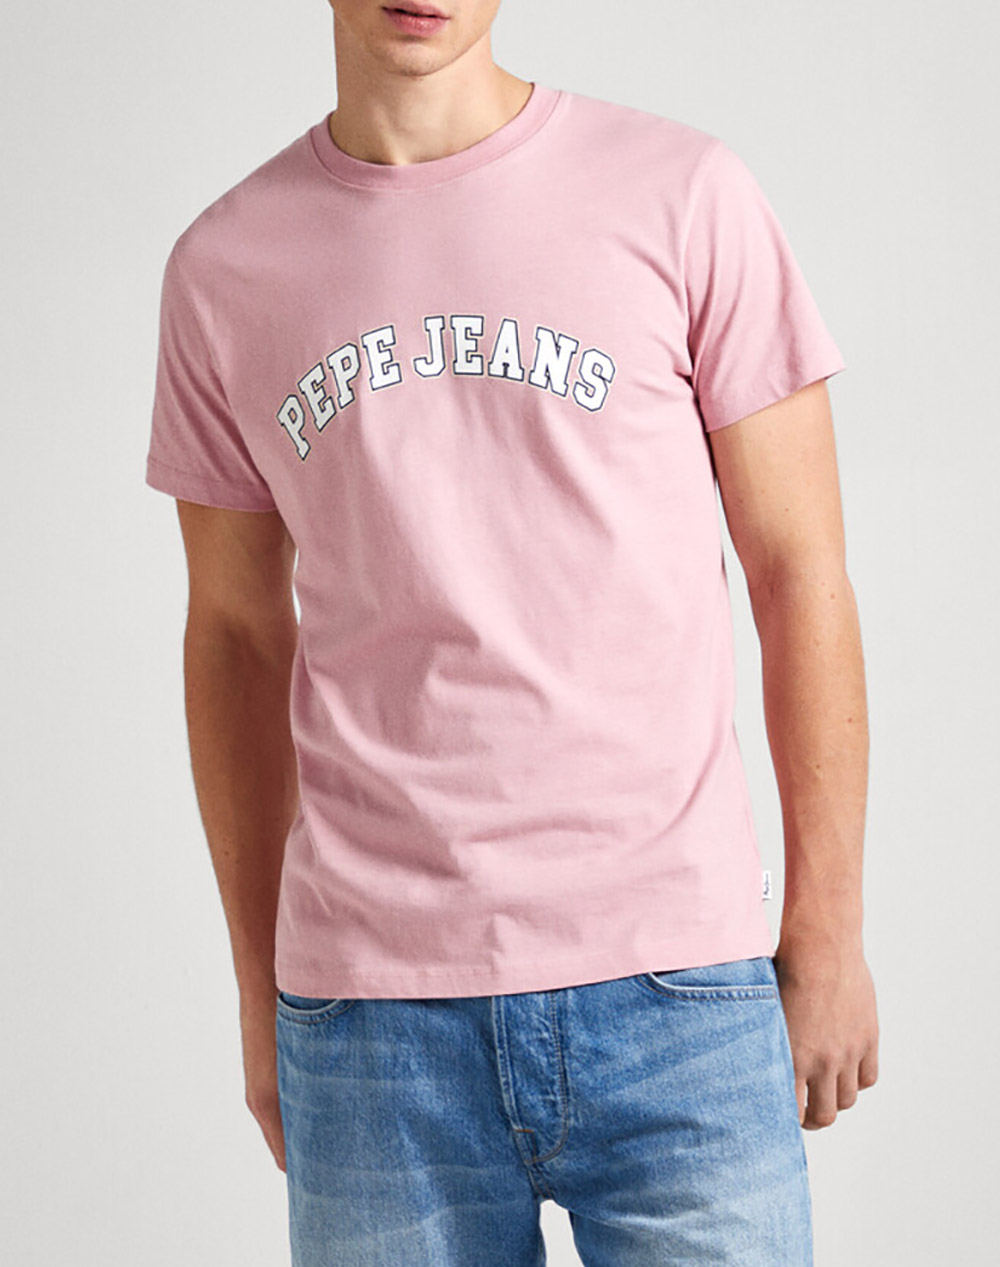 PEPE JEANS DROP 0 CLEMENT ΜΠΛΟΥΖΑ ΑΝΔΡΙΚΟ PM509220-323/ASH ROSE Pink 3820APEPE3400184_XR29603